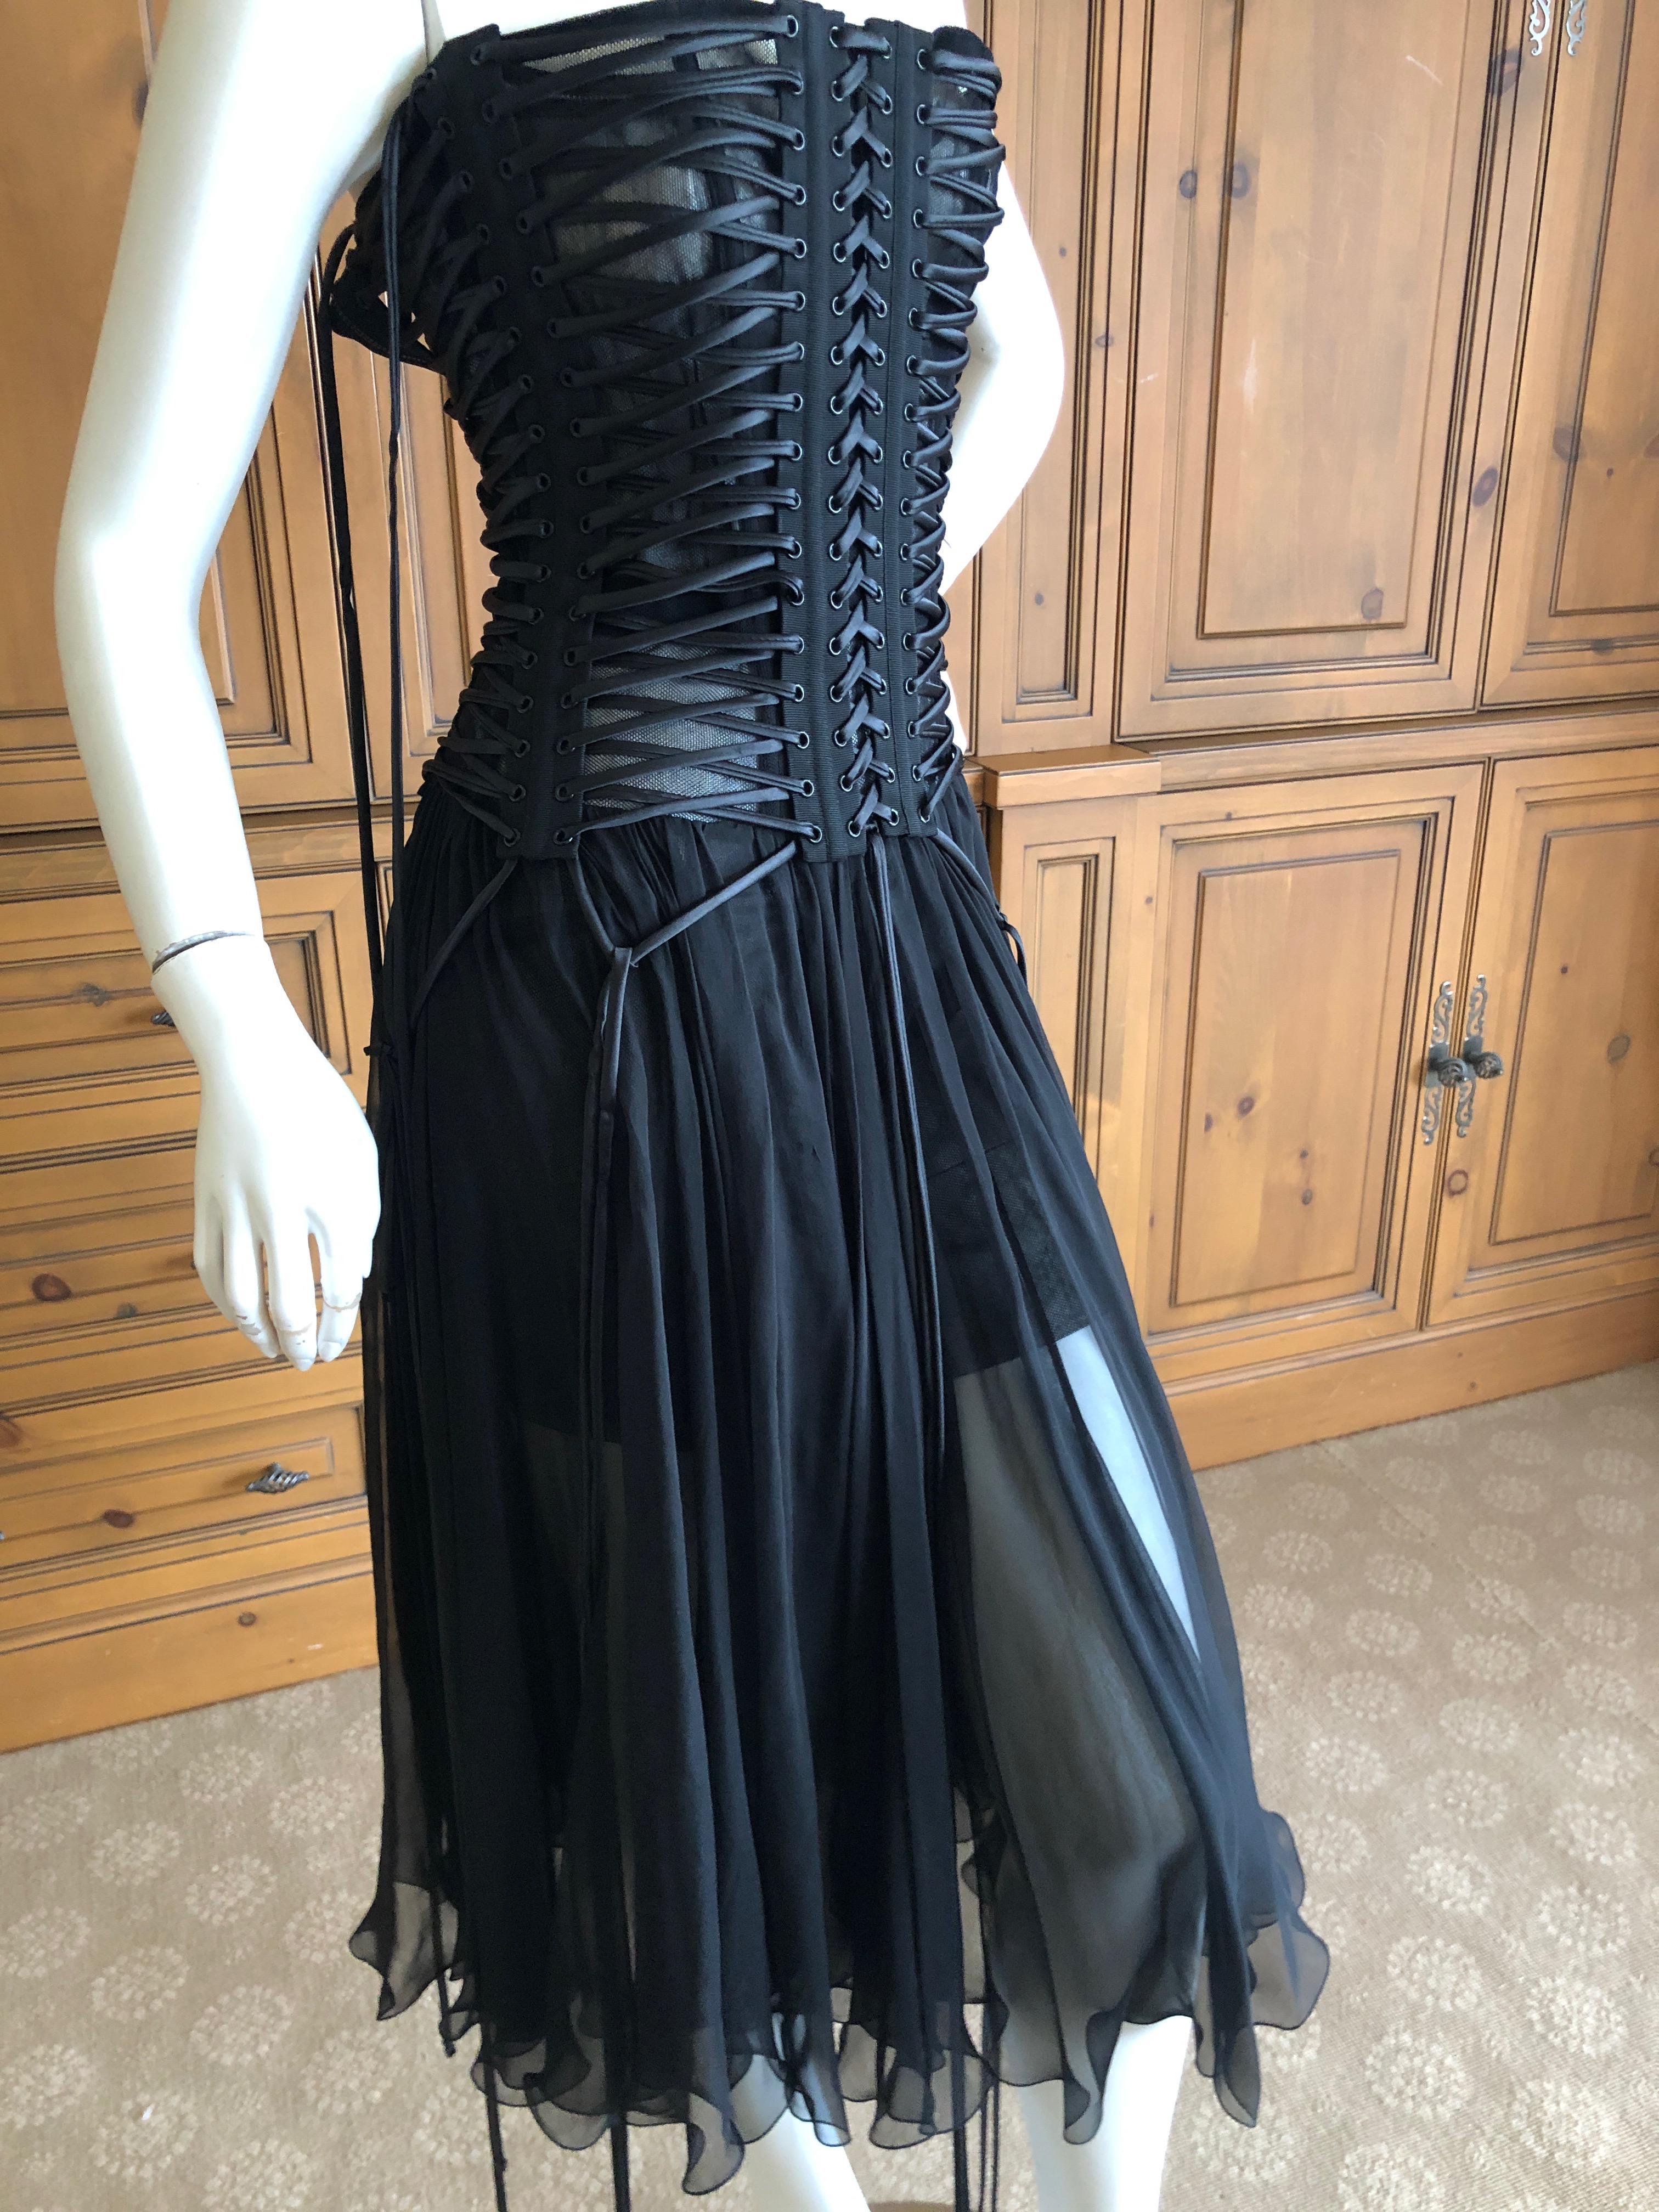 Dolce & Gabbana Daring Lace Up Corset Dress New with Tags $3295 Size 44 In New Condition For Sale In Cloverdale, CA